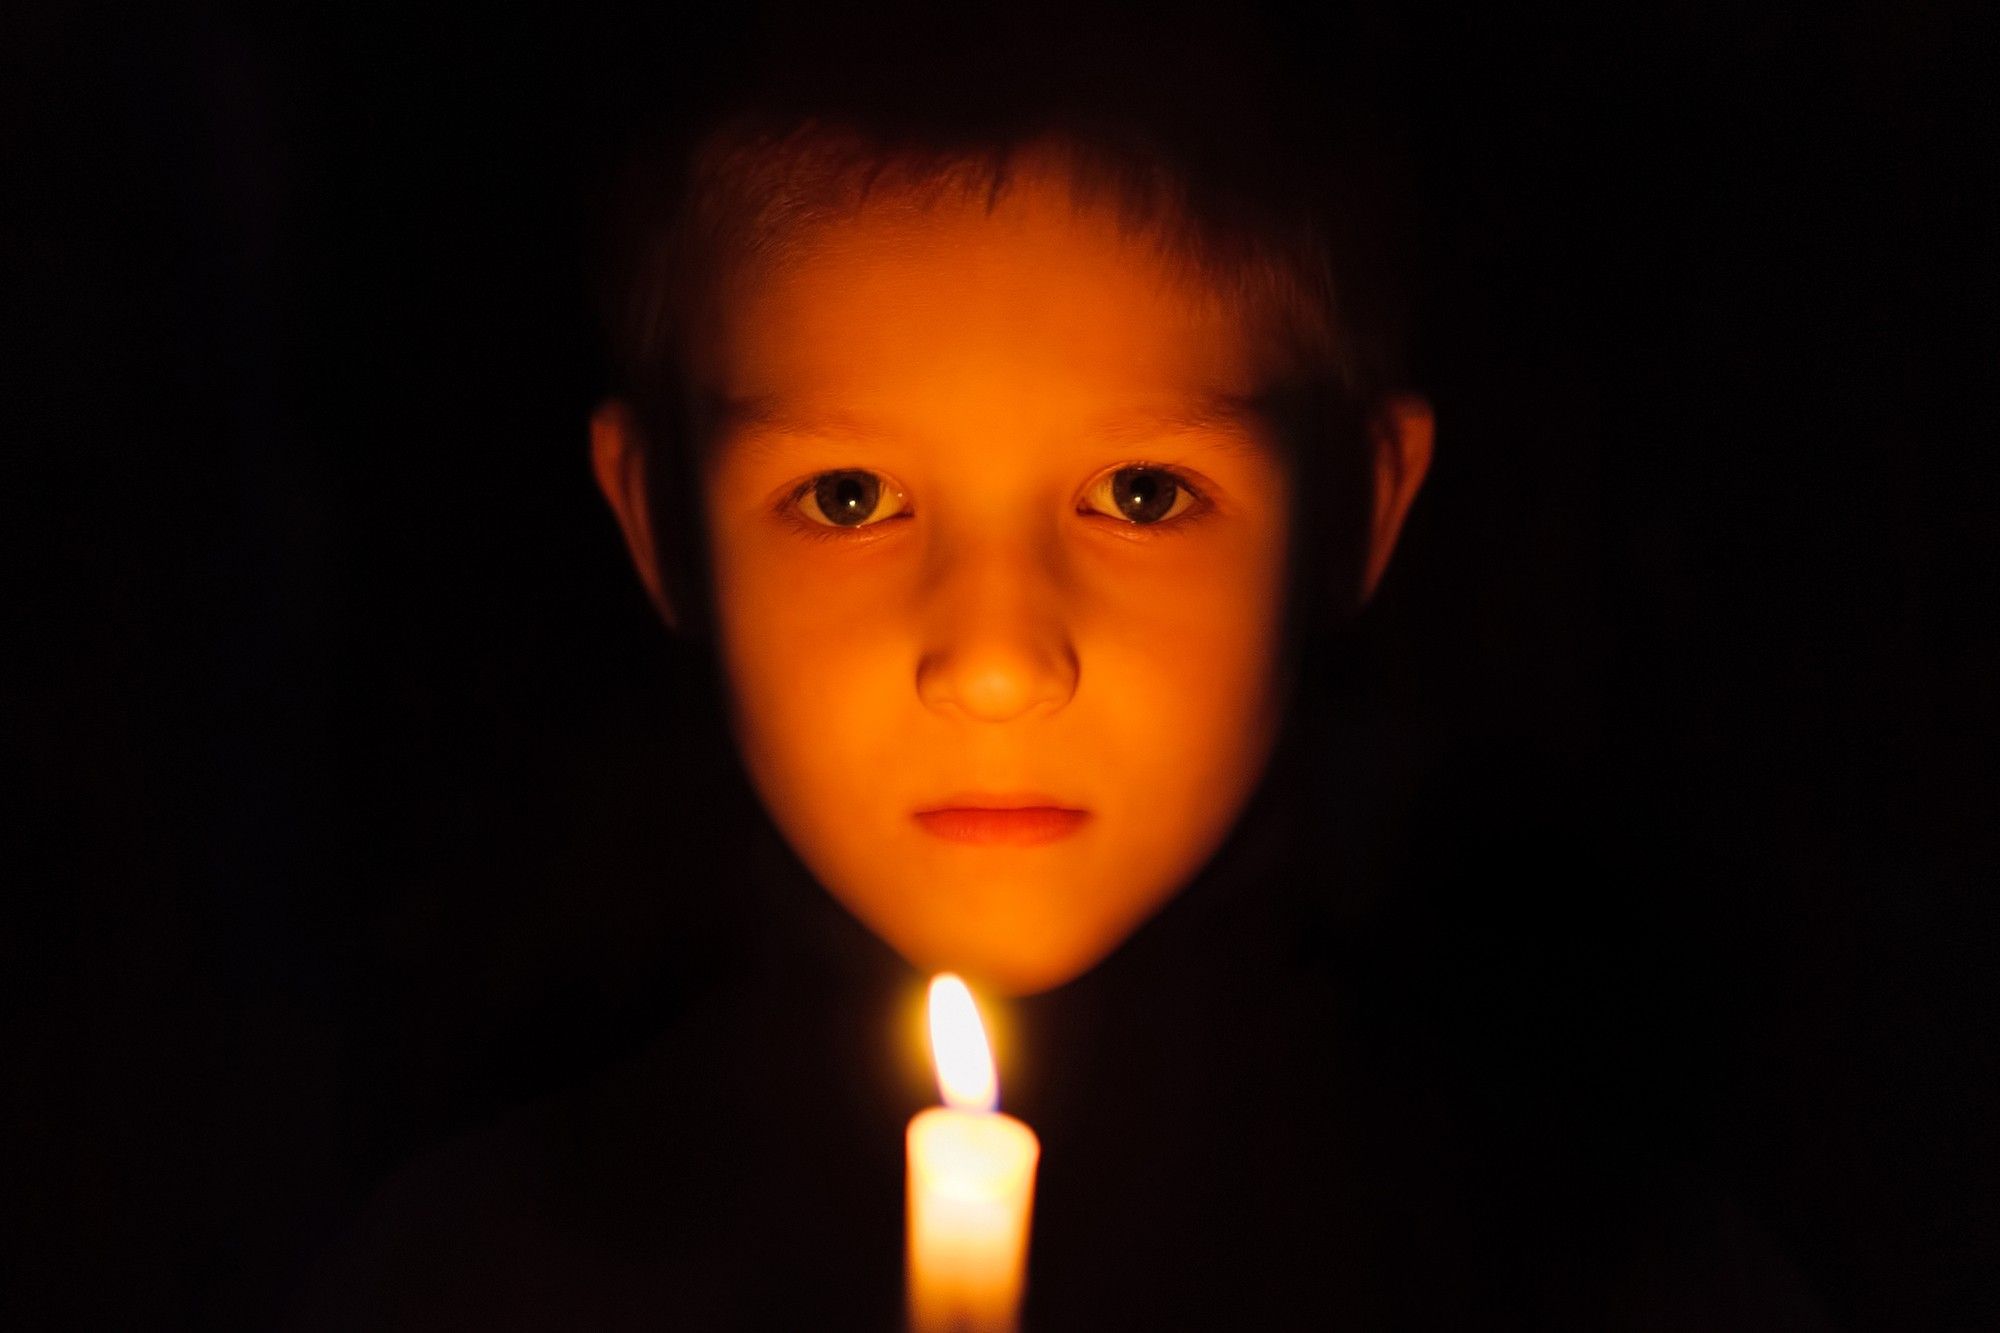 child and candle in power outage